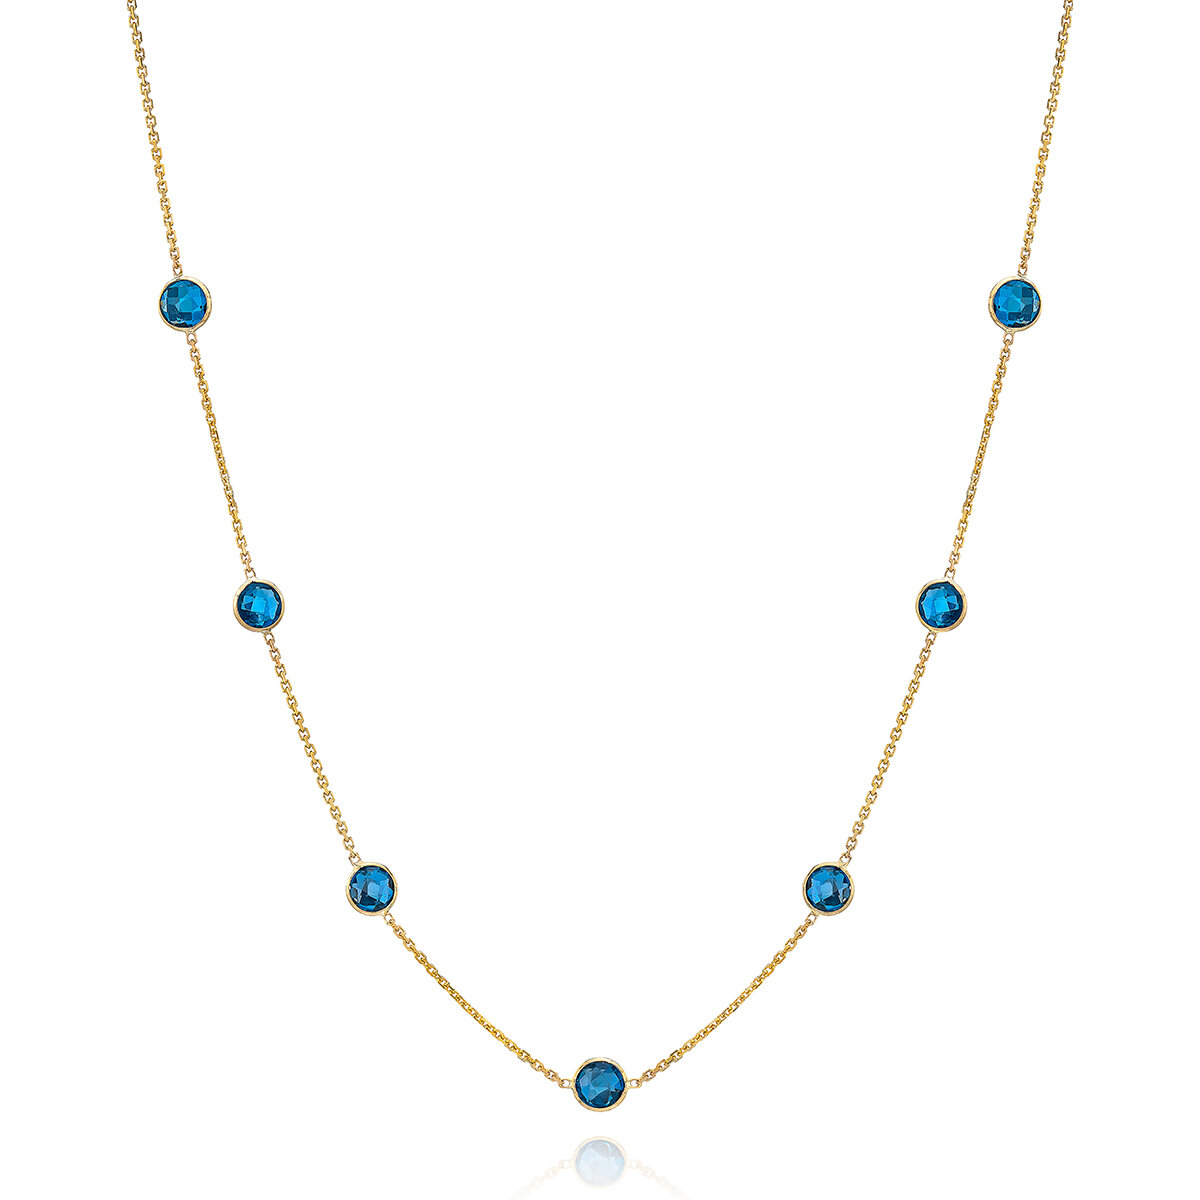 Blue Topaz Necklace, 14k Yellow Gold